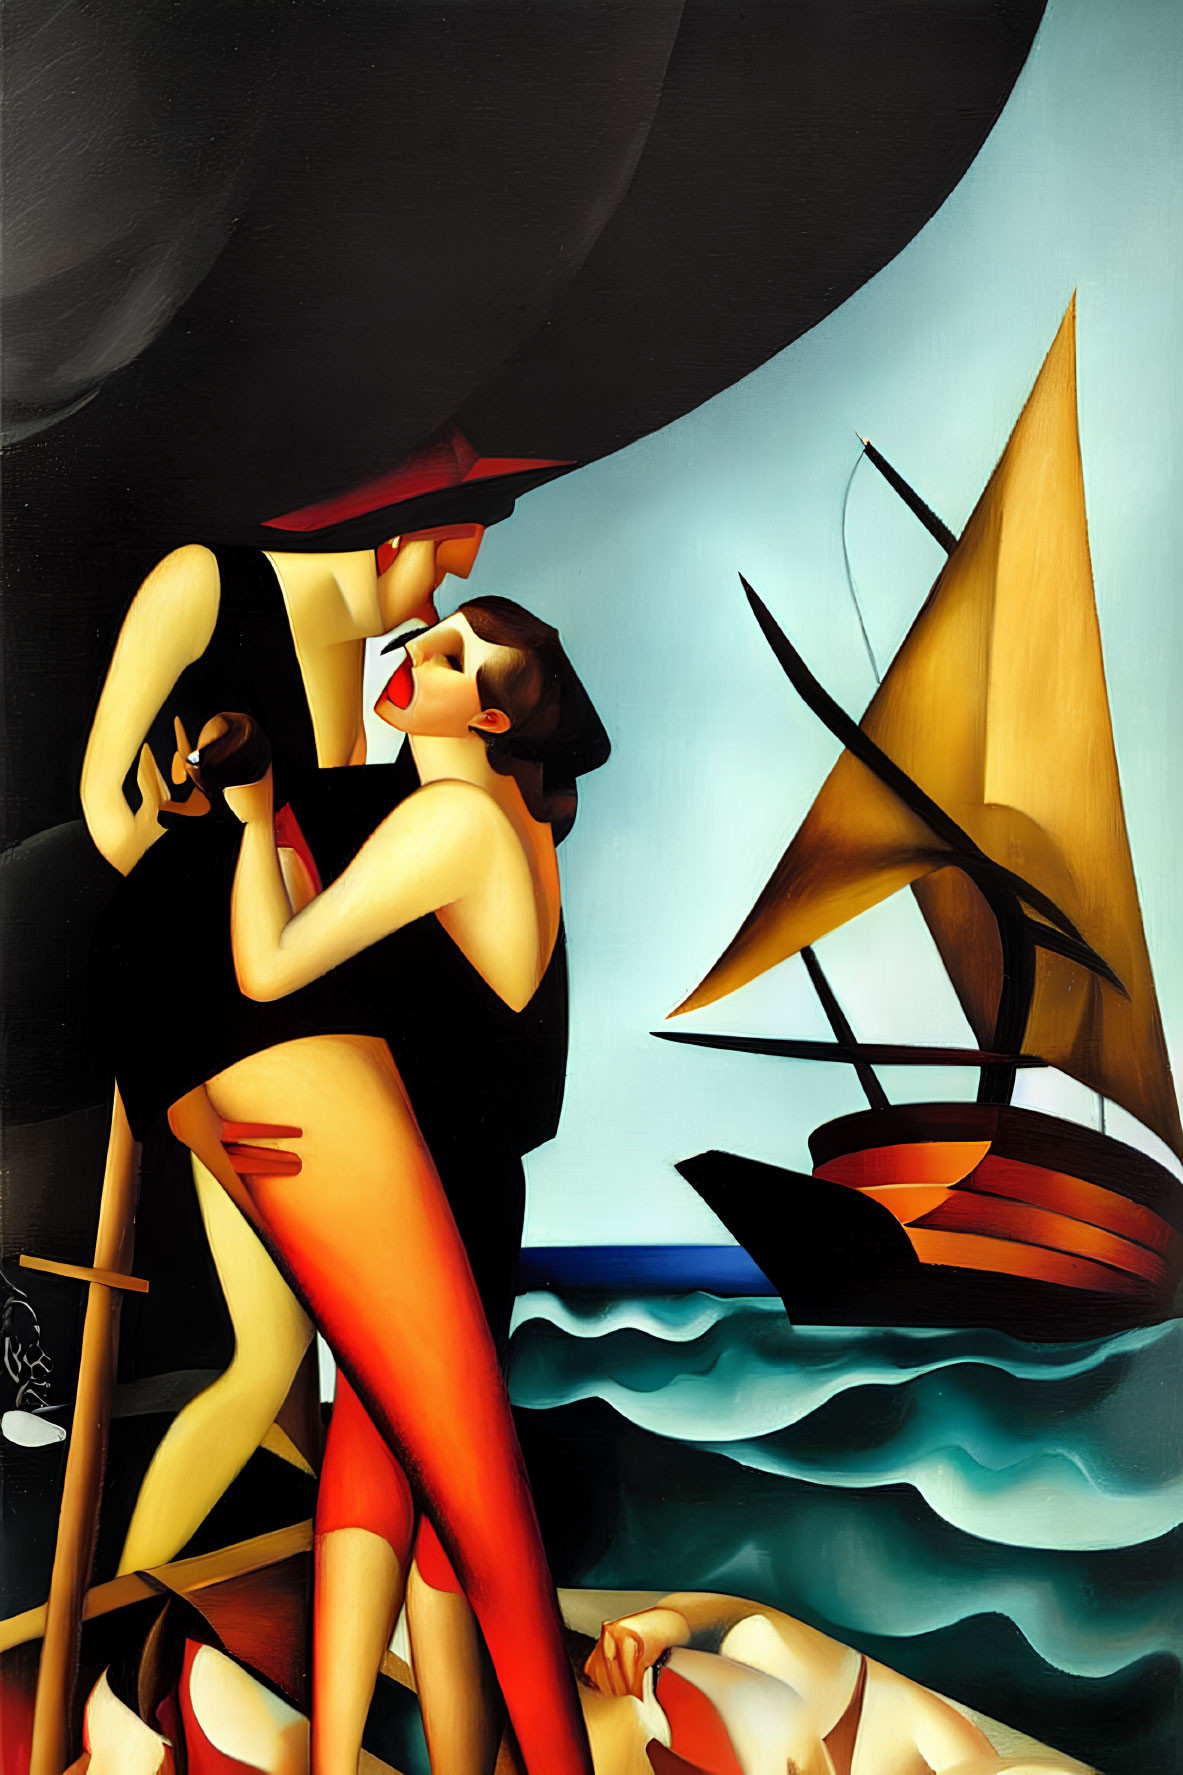 Vibrant painting of couple embracing by the sea with sailboat